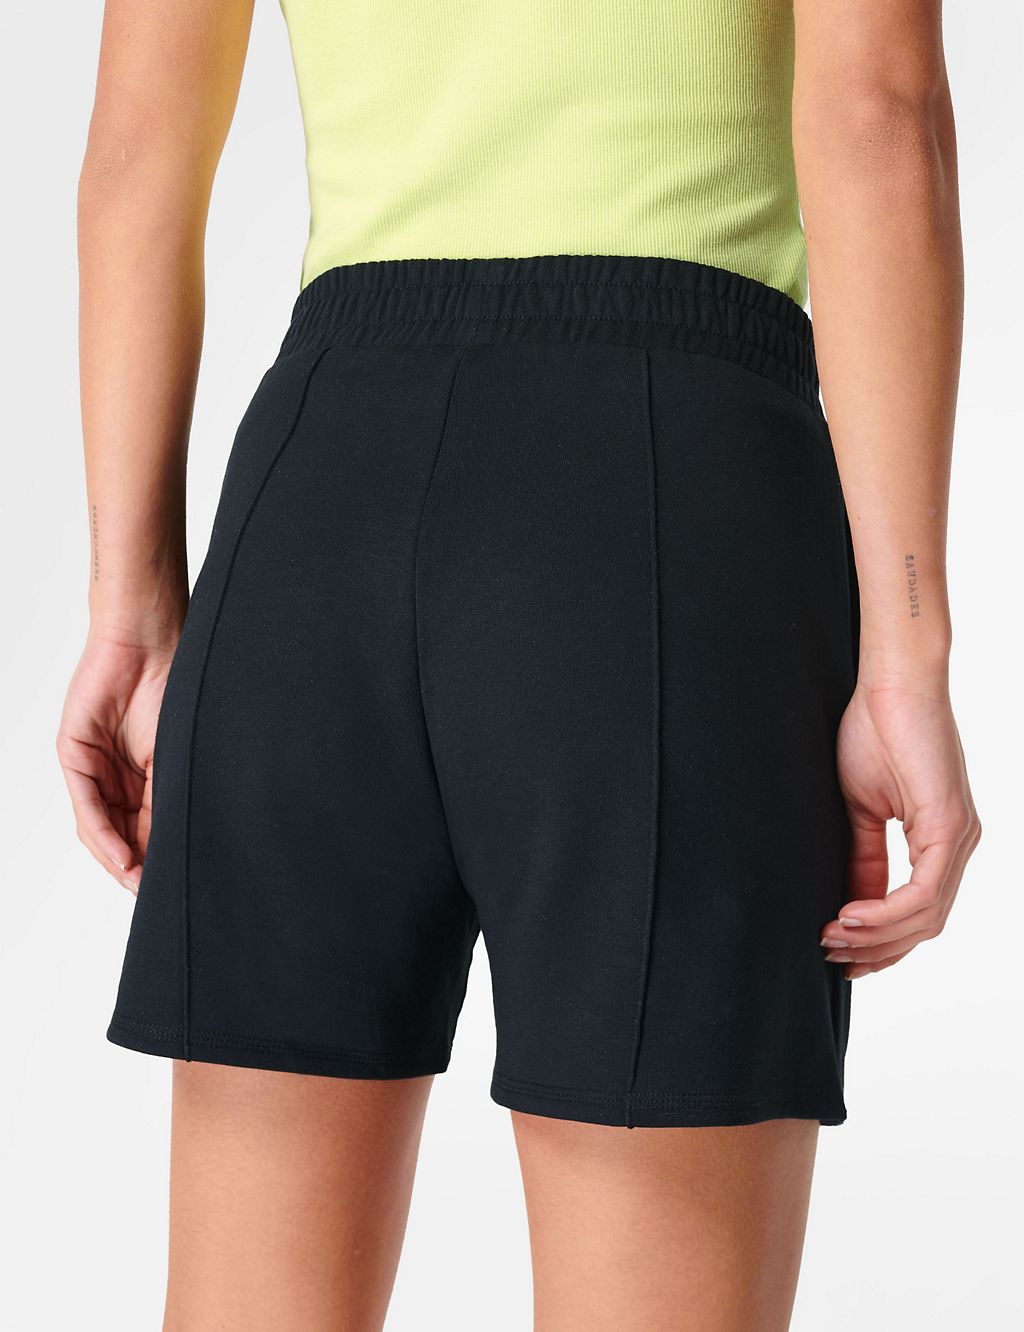 After Class Cotton Modal High Waisted Shorts 5 of 6